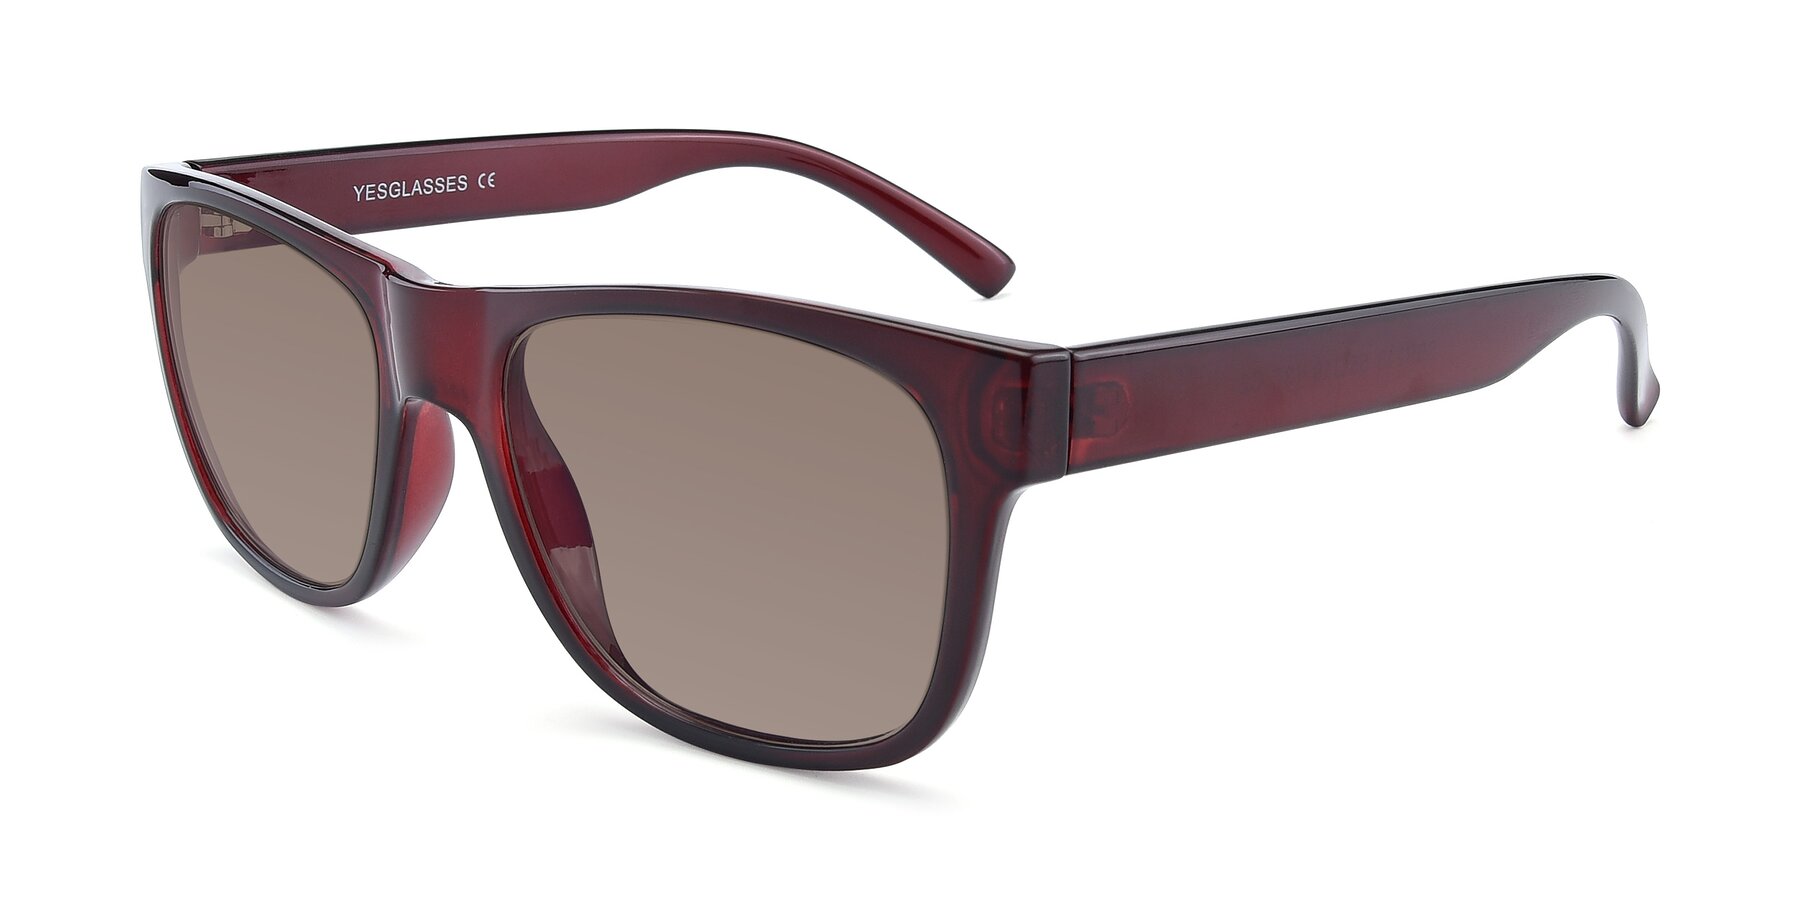 Angle of SSR213 in Wine with Medium Brown Tinted Lenses